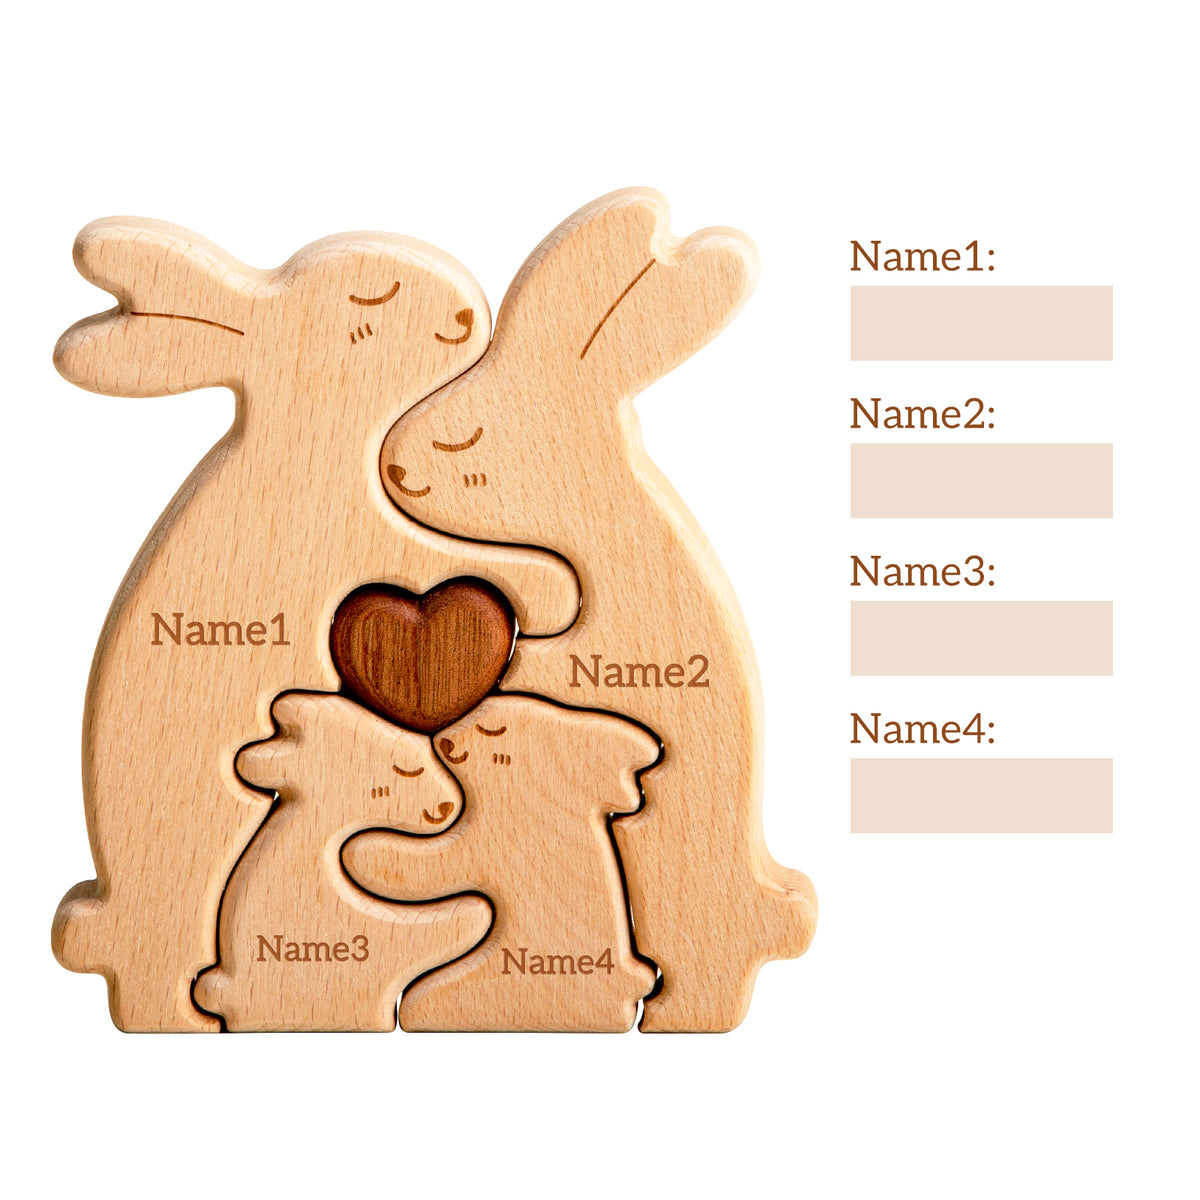 Customizedbee Rabbit Family Puzzle, Personalized Wooden Puzzles with 2–5 Names, Unique Easter Basket Stuffers for Lucky